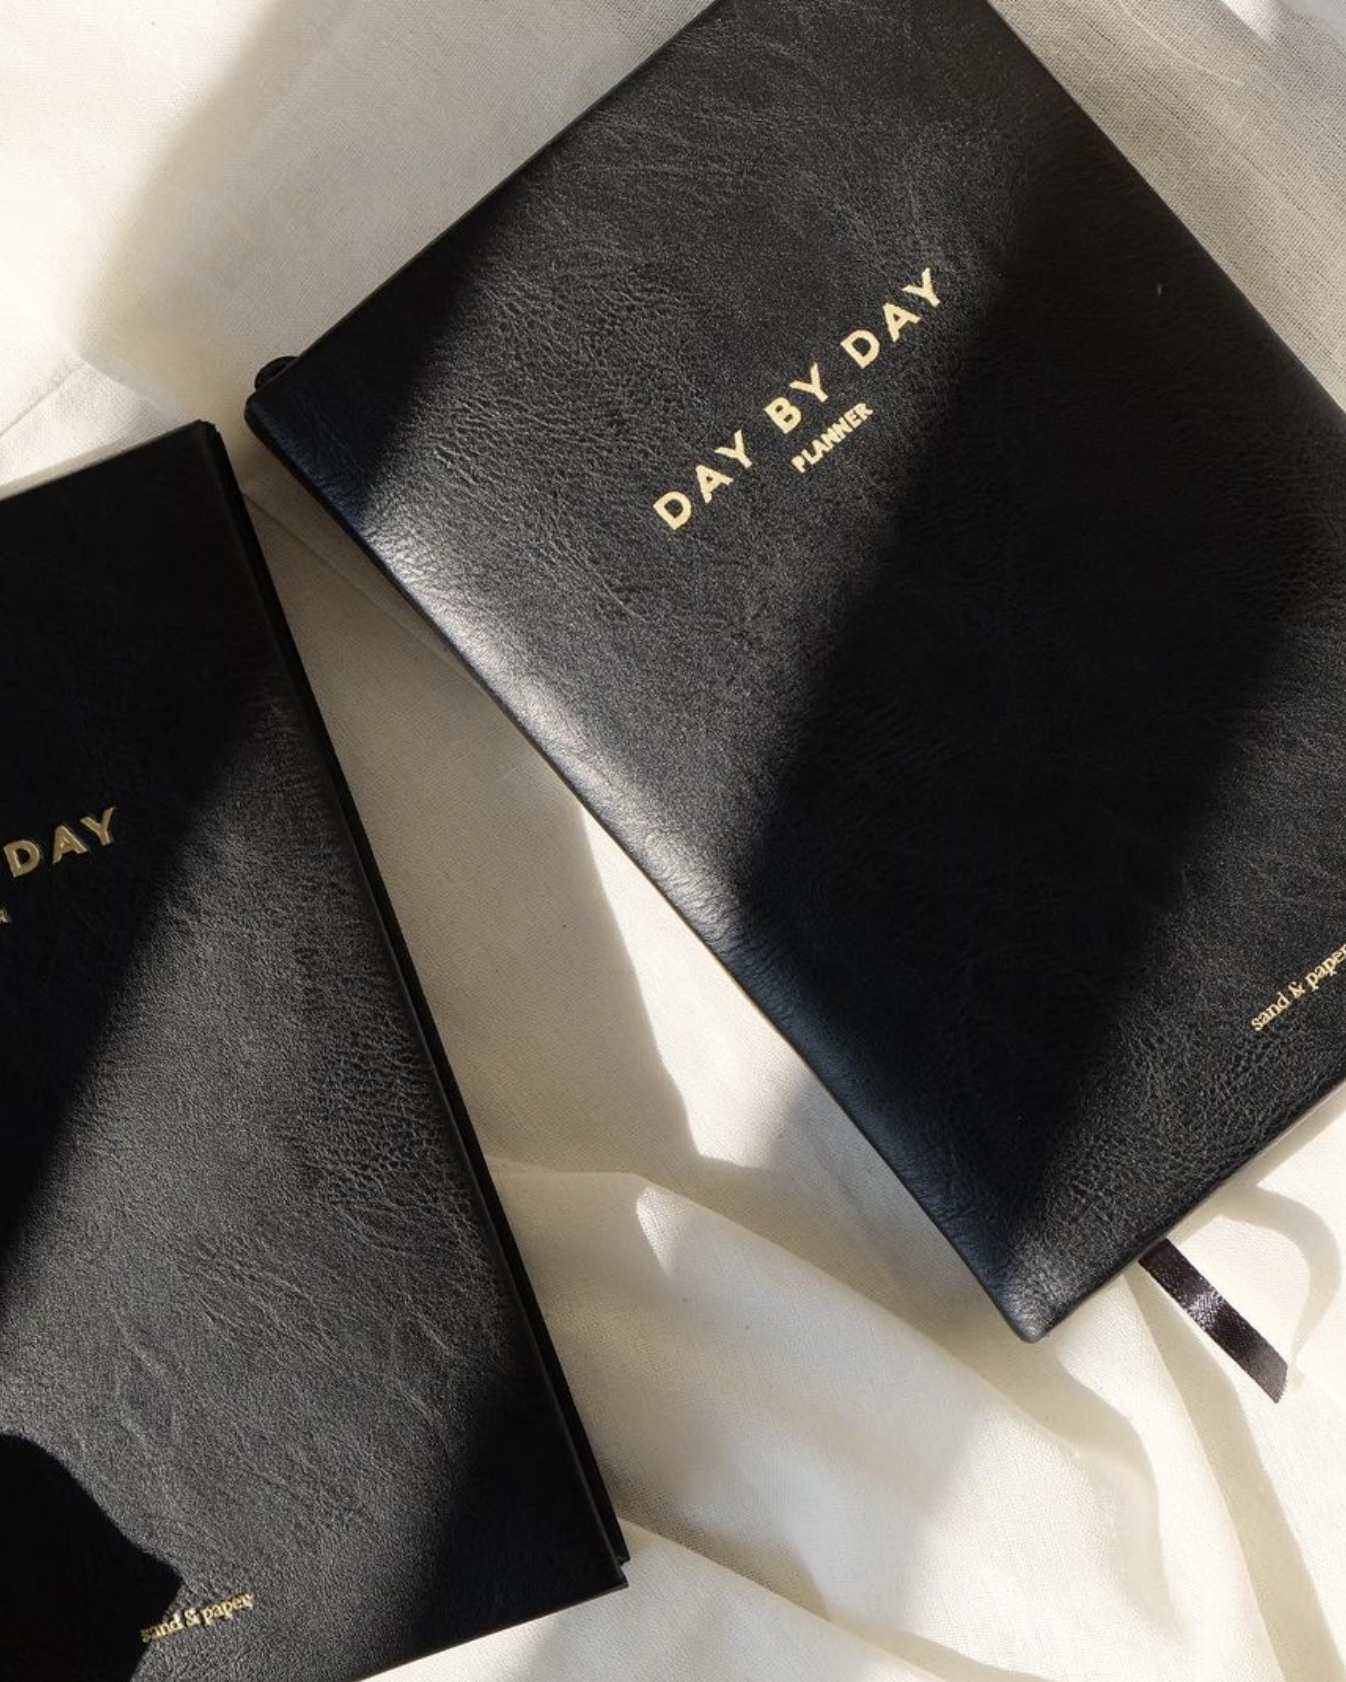 DAY BY DAY PLANNER